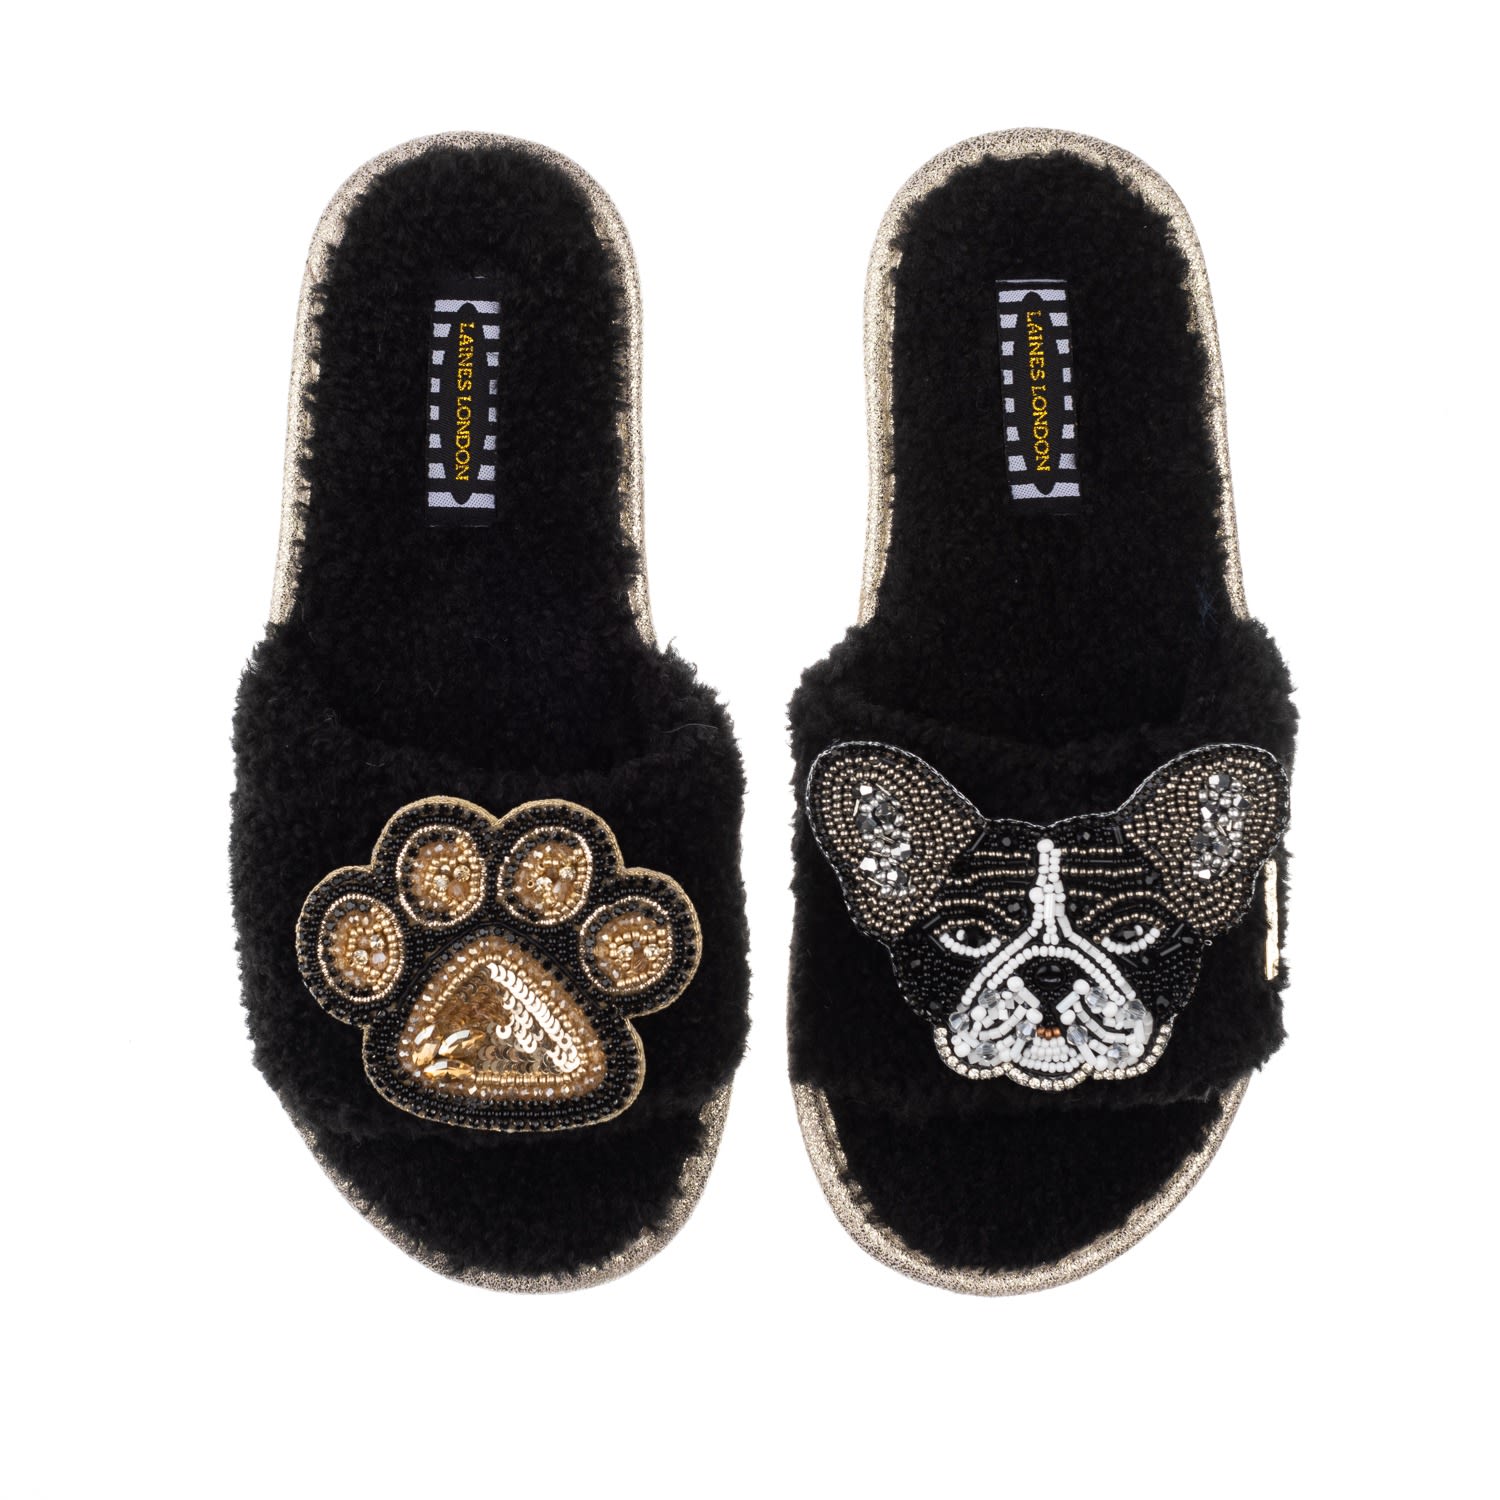 Laines London Women's Teddy Towelling Slipper Sliders With Coco & Paw Brooch - Black